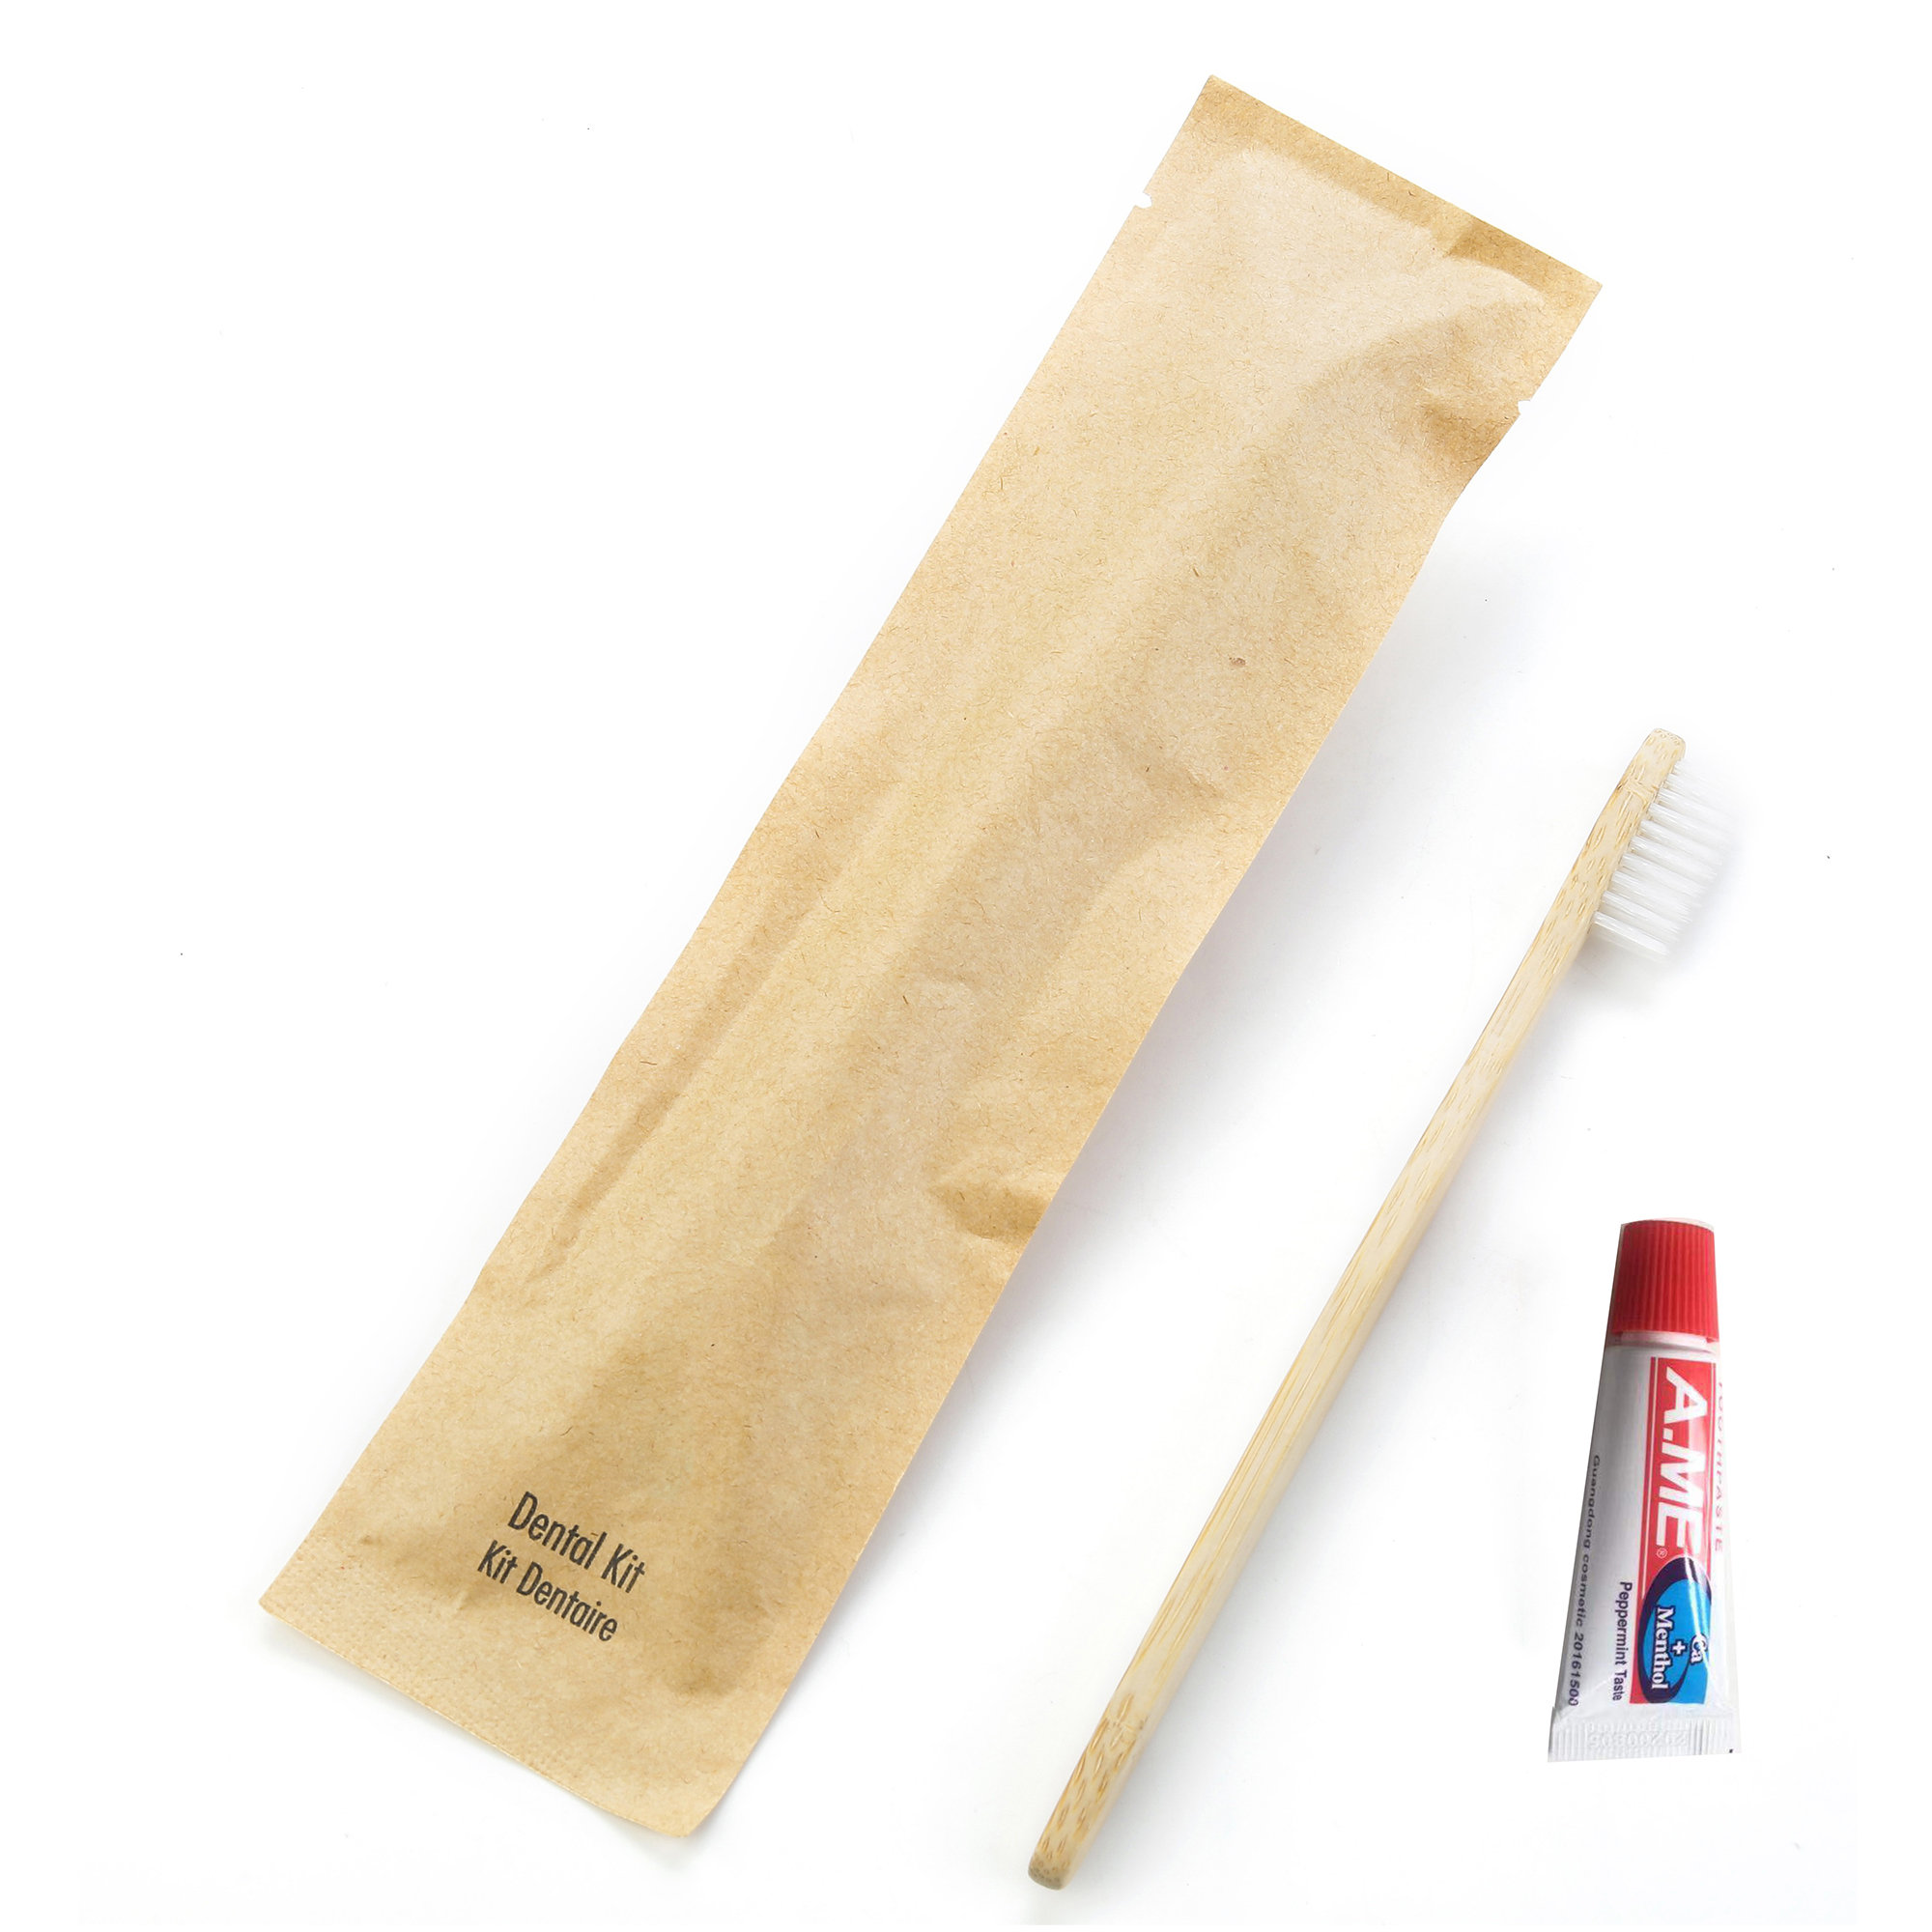 BIOCORN Bamboo Toothbrushes with Toothpaste